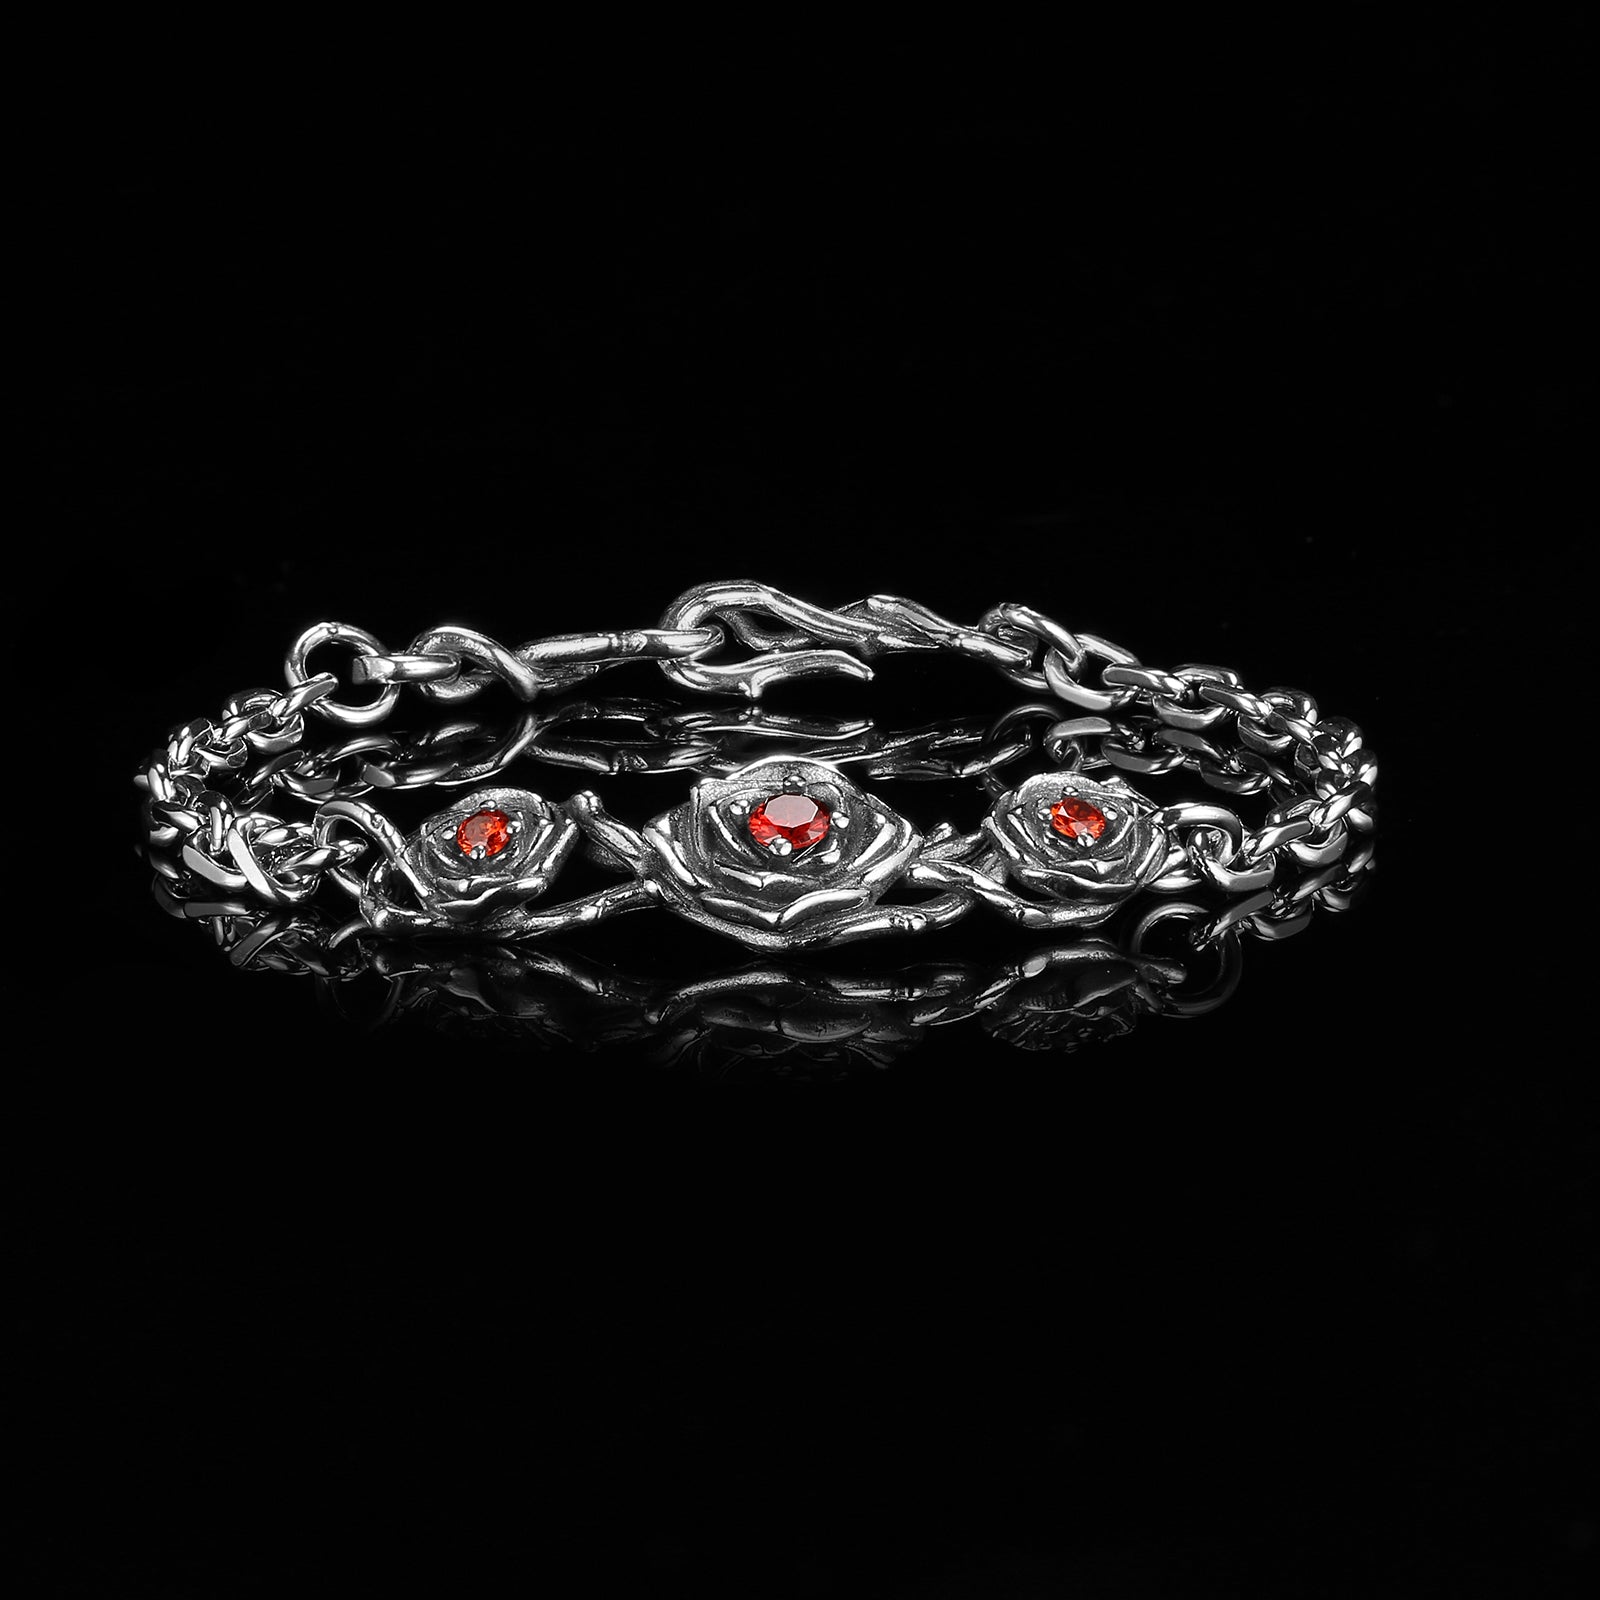 RED ROSES ARMBAND. - 925 SILBER